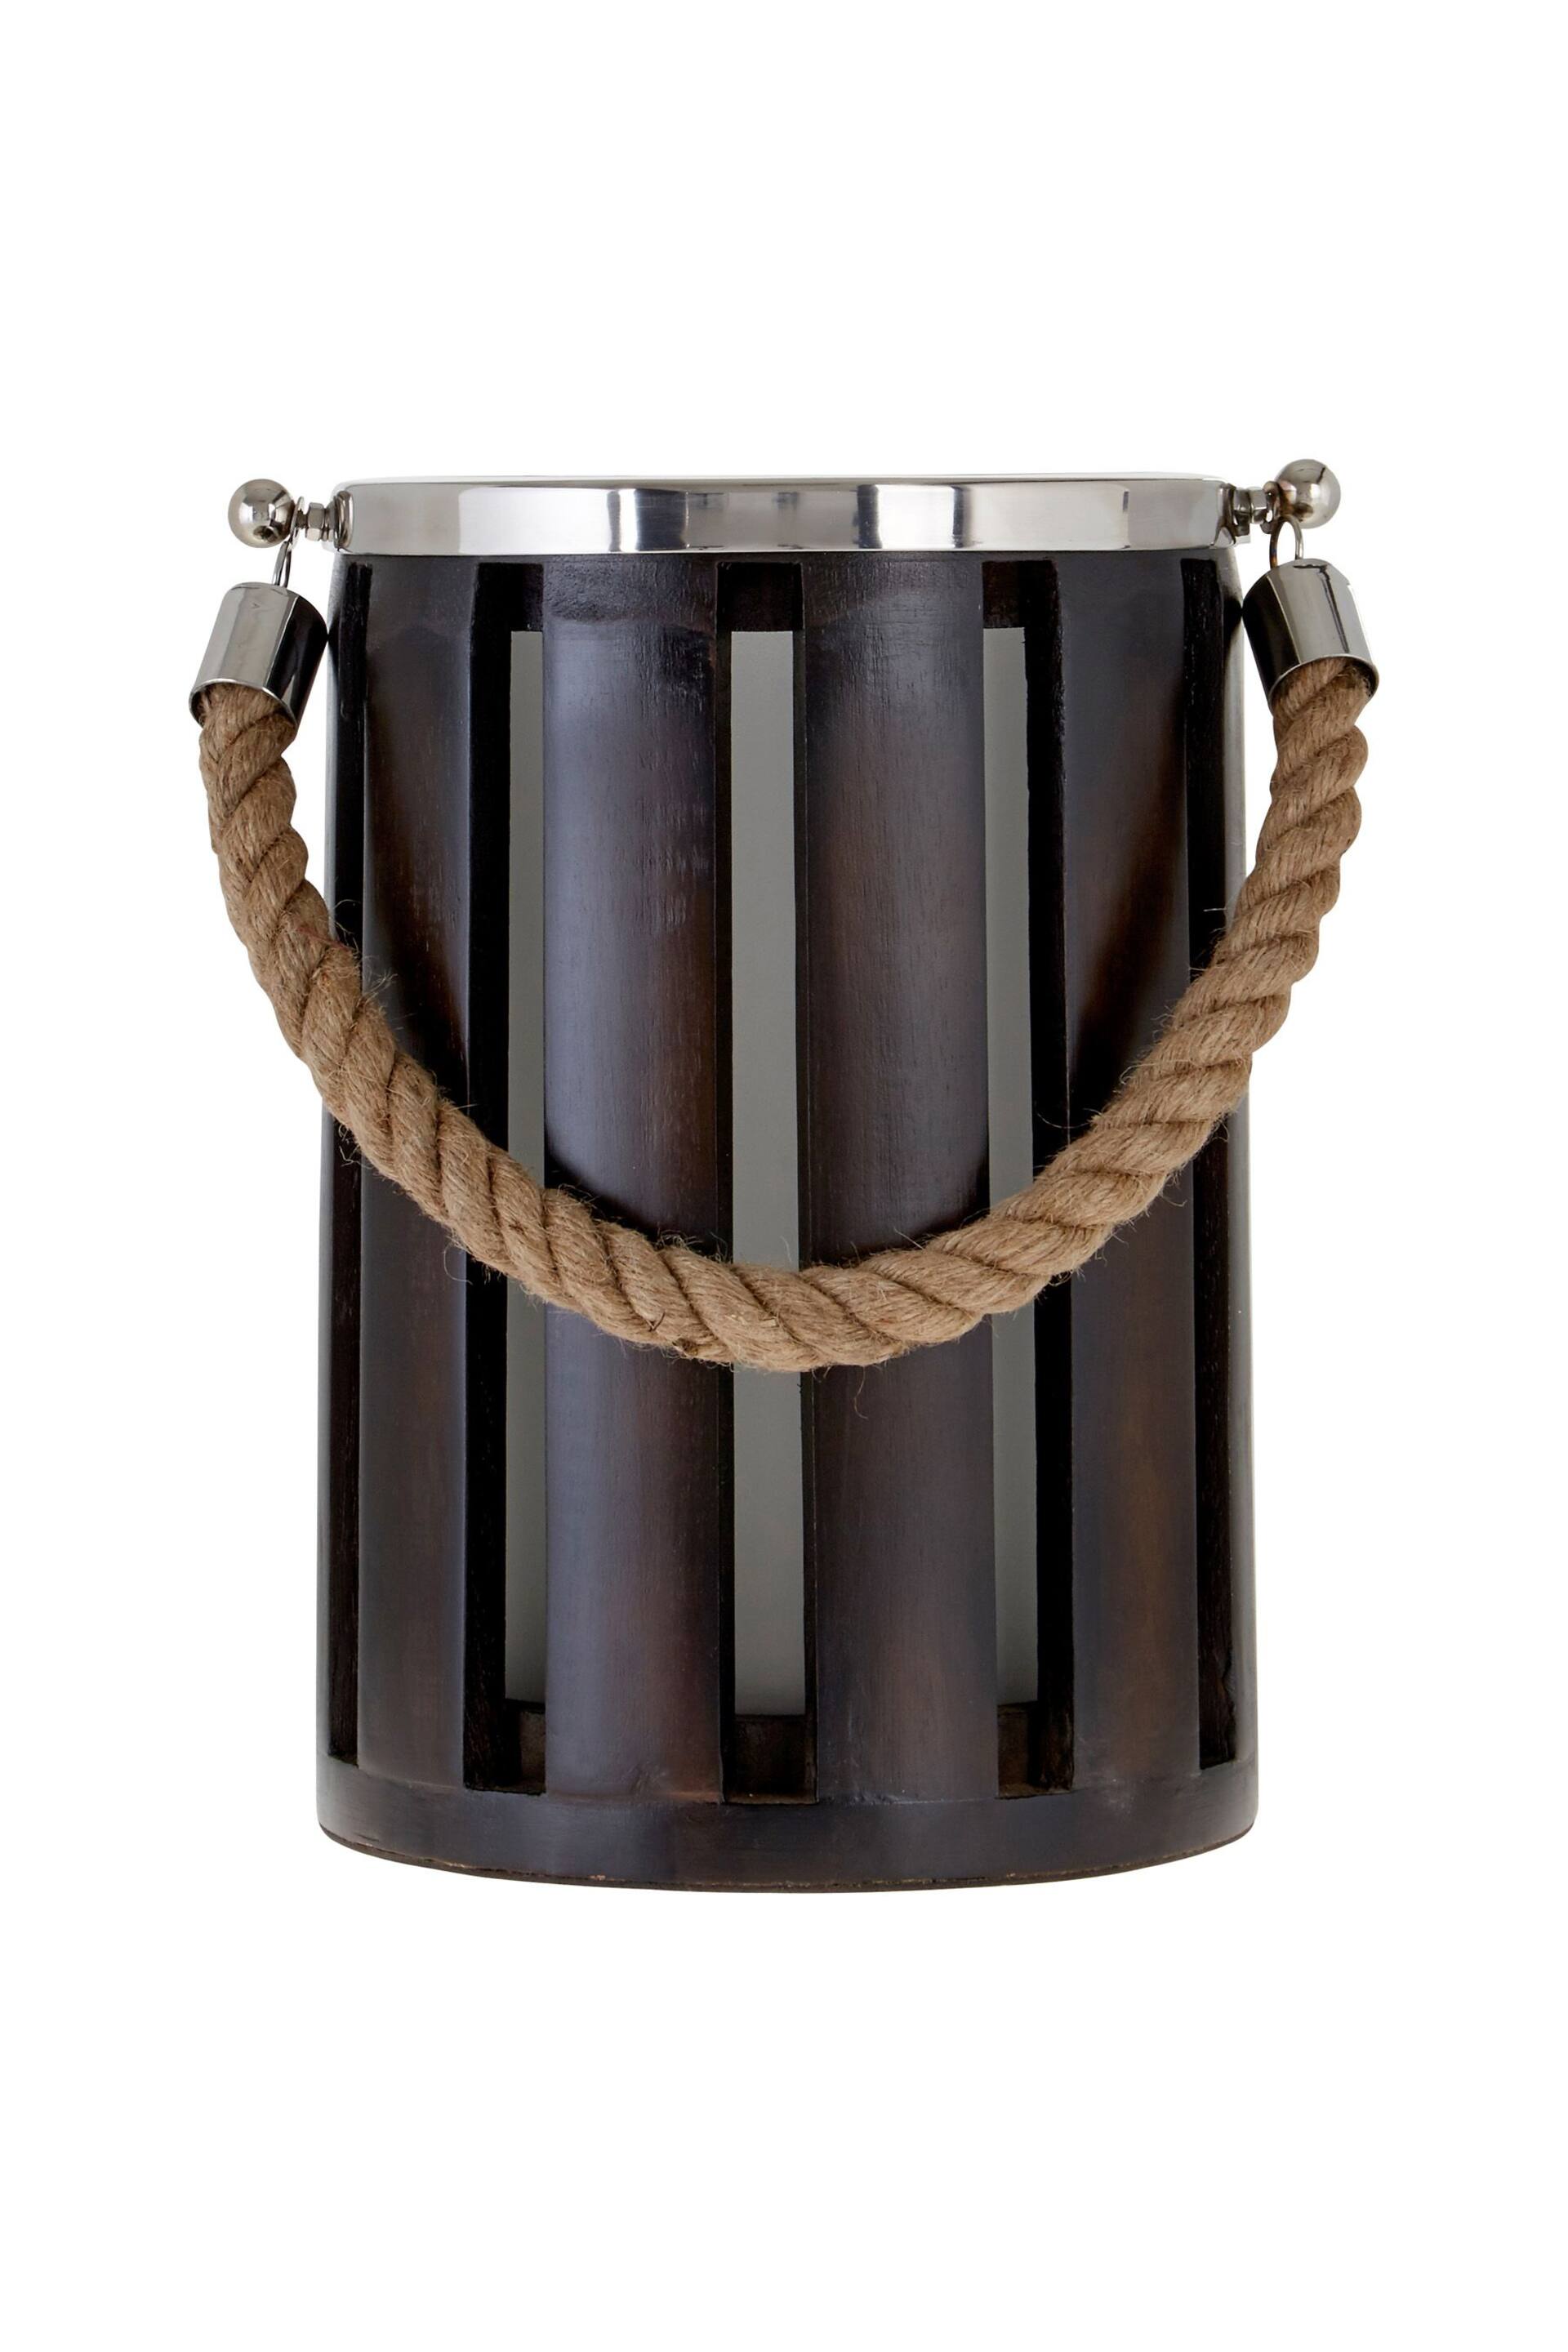 Fifty Five South Black Hampstead Candle Holder - Image 2 of 4